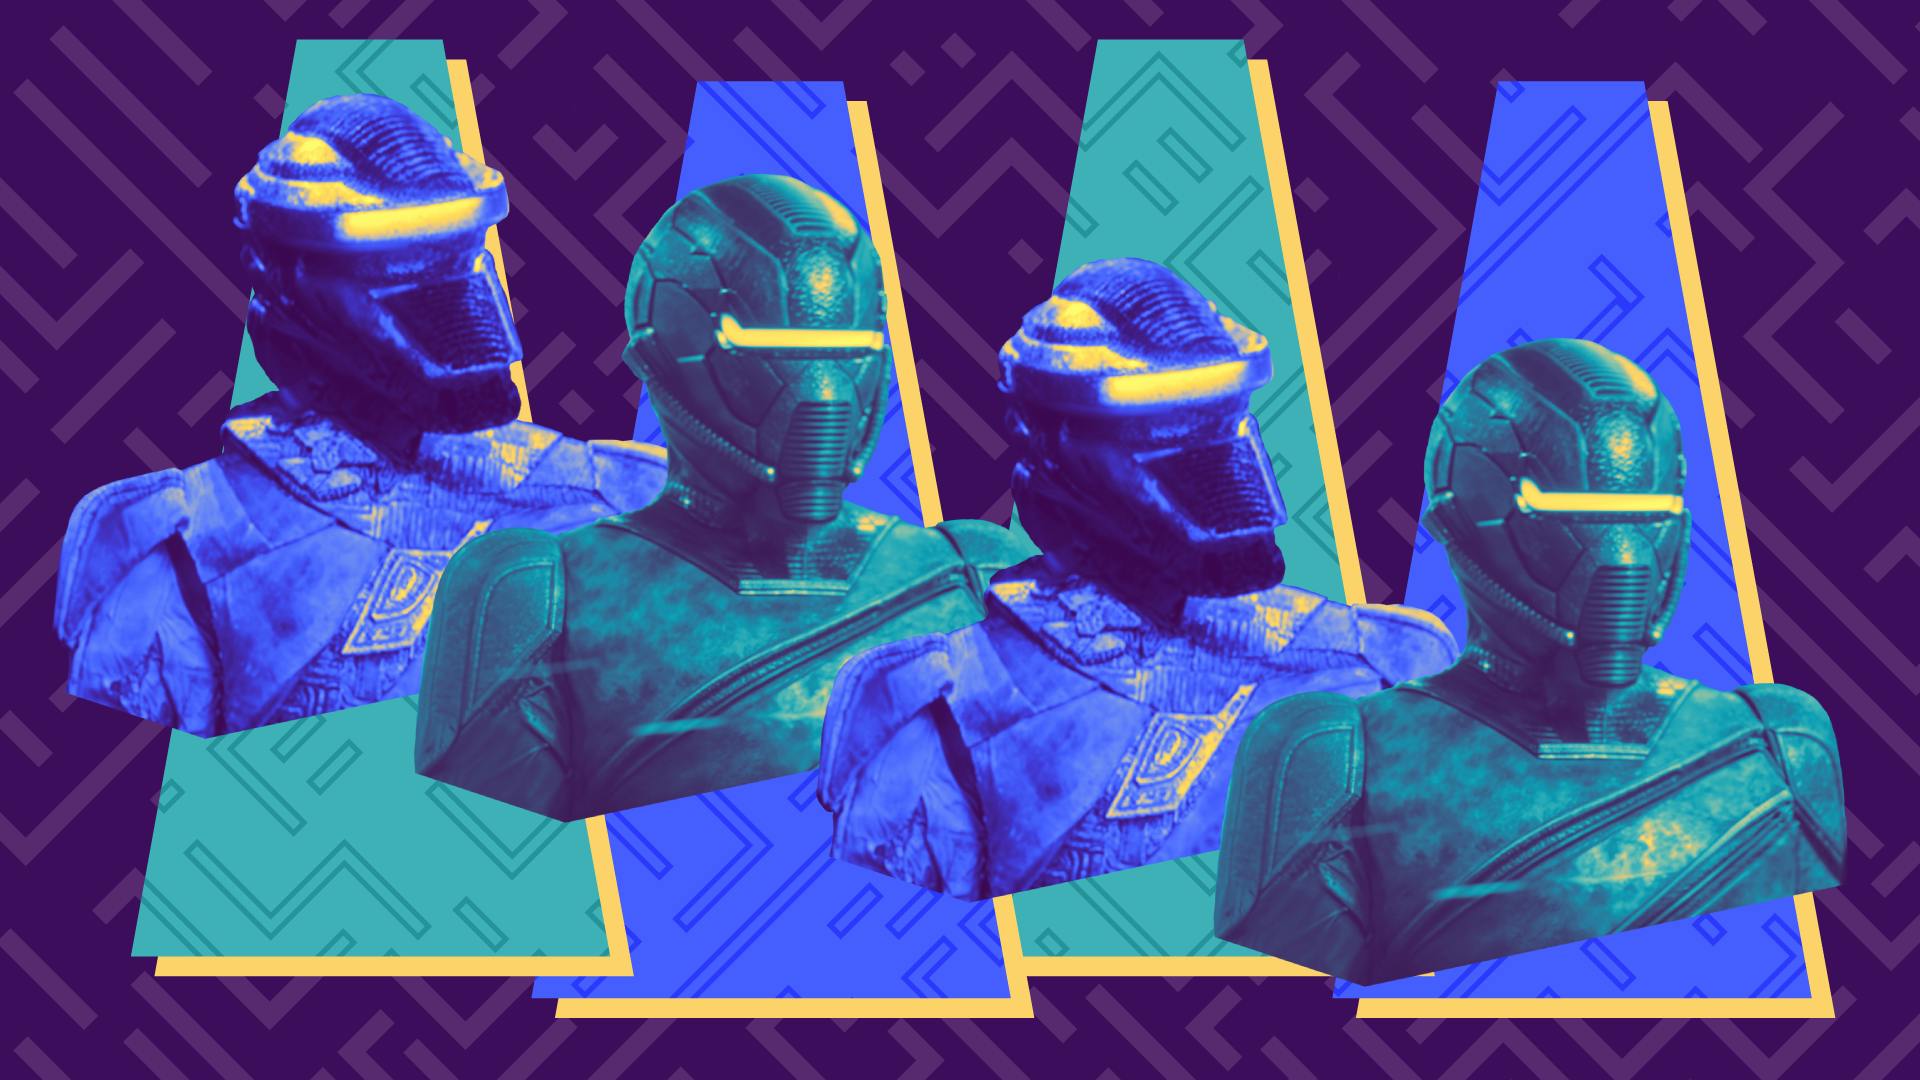 Stylized and filtered repeating images of Breen soldiers